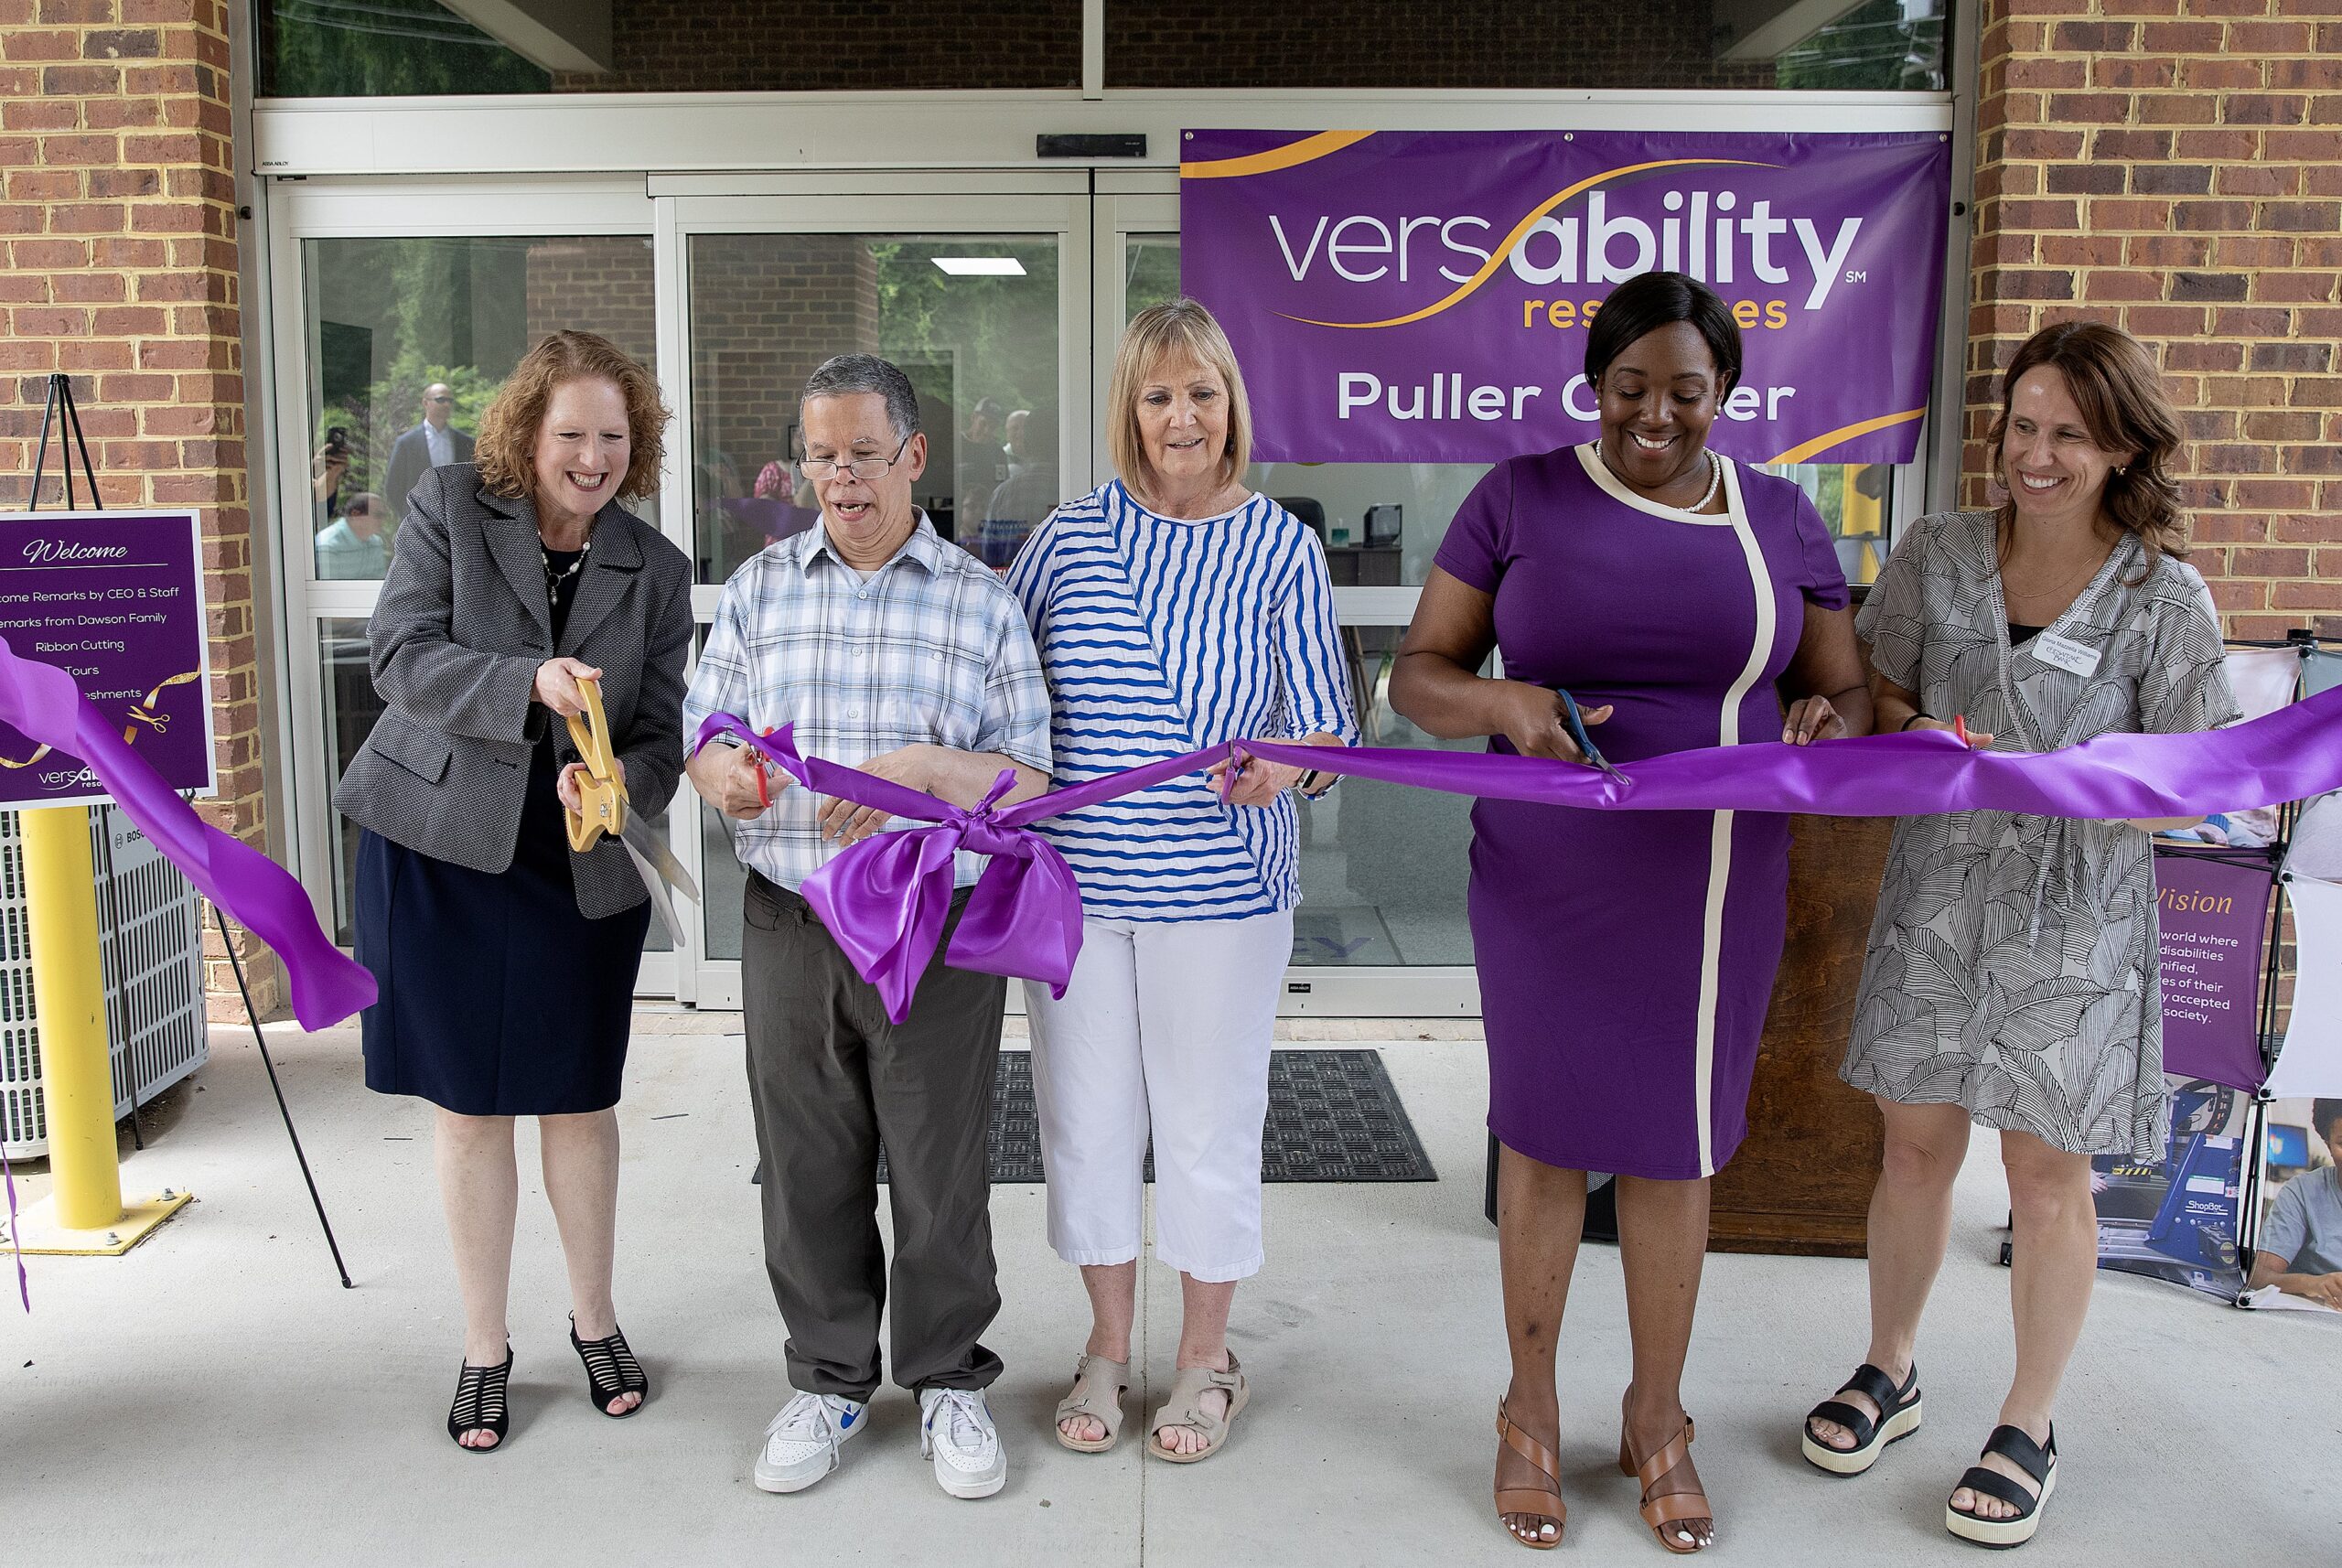 Four women and one man stand in front of the Puller Center while one of the woman cuts a large purple ribbon in front of the doors